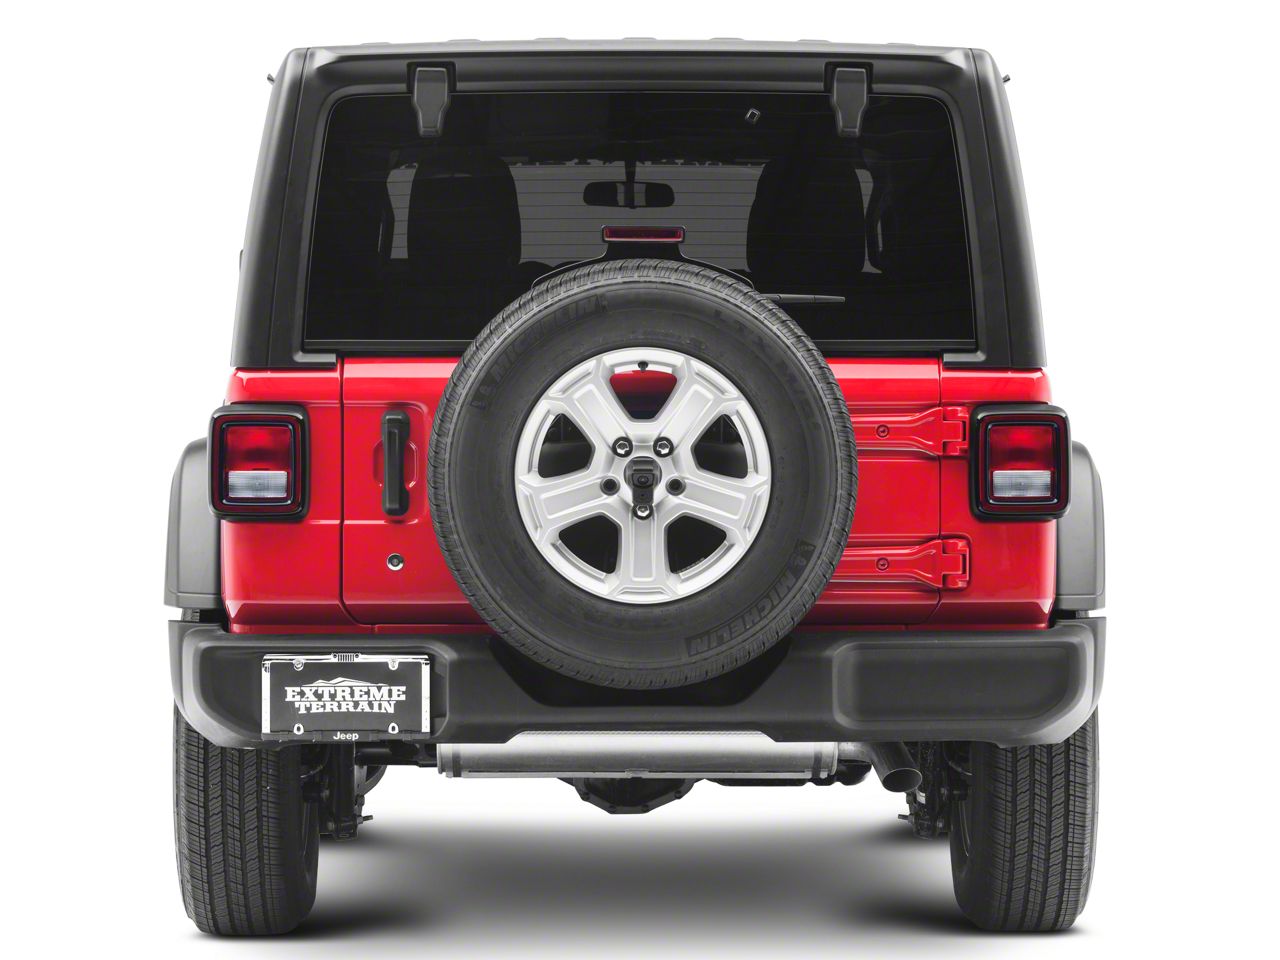 Jeep Mountain Laser Etched Rugged Black License Plate Official Licensed